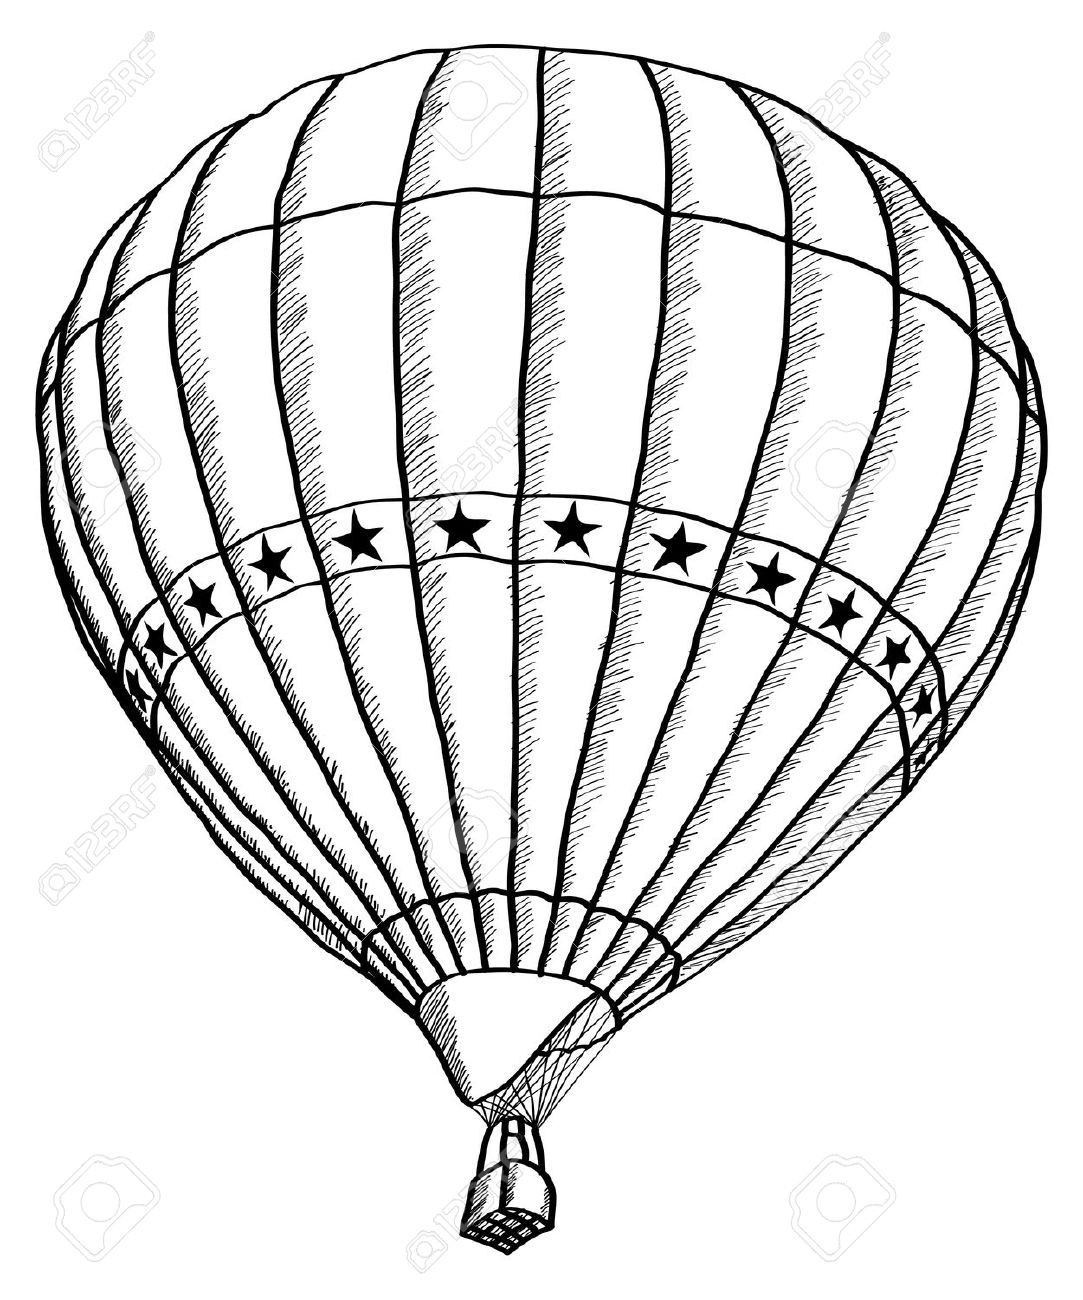 Image result for hot air balloon simple black and white